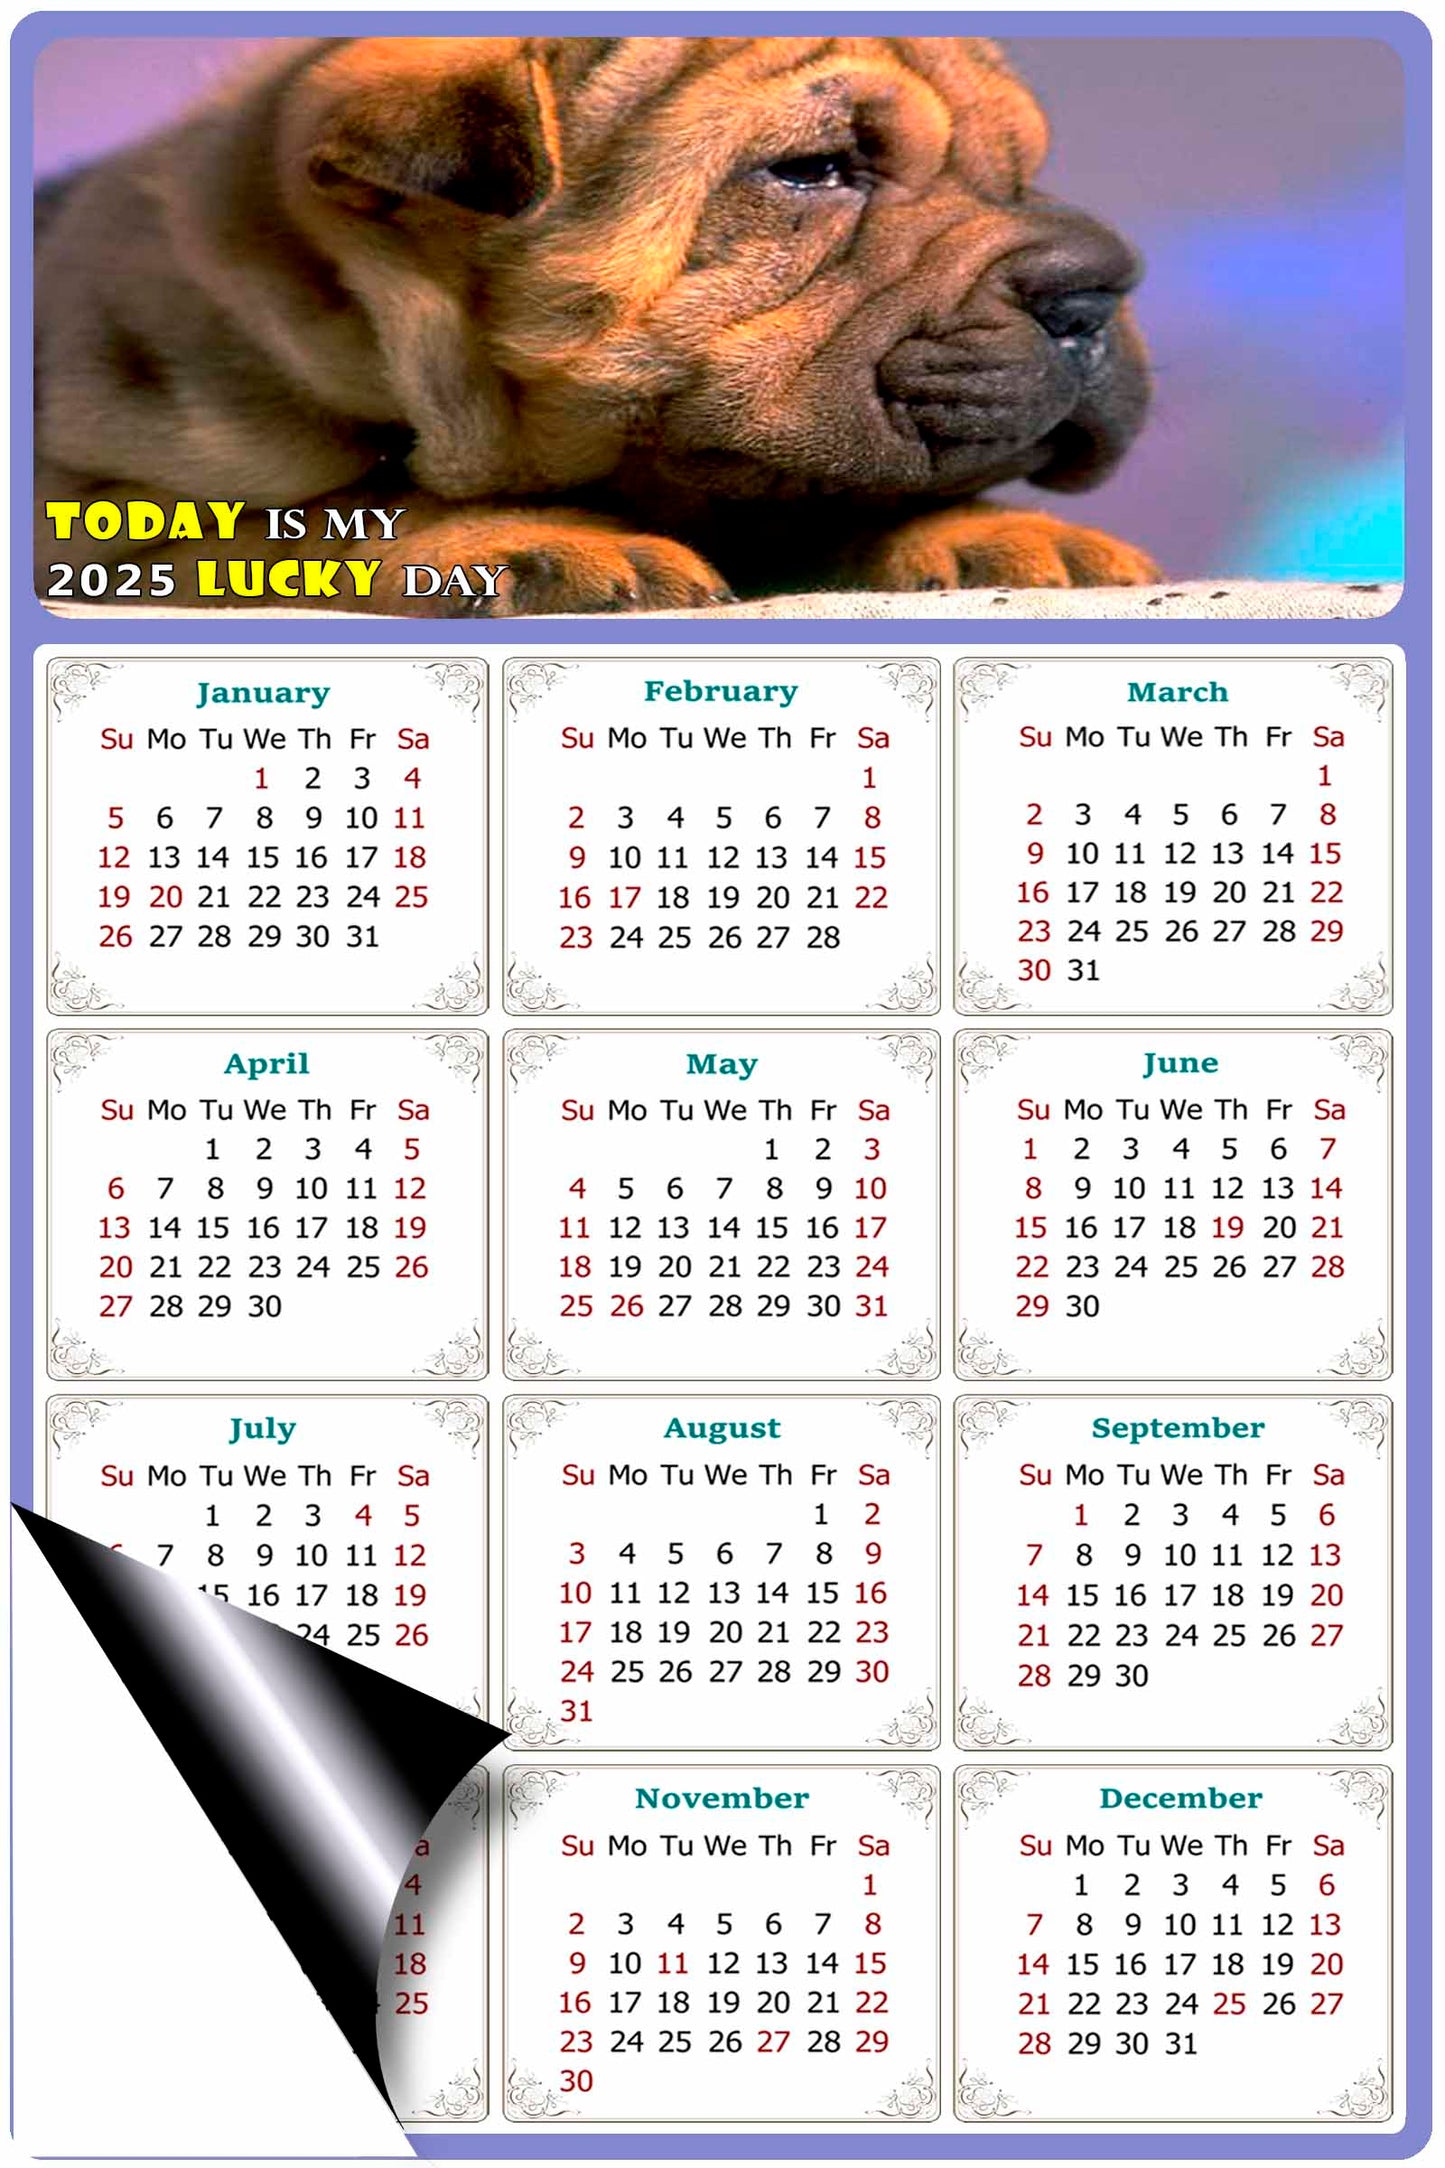 2025 Magnetic Calendar - Today is My Lucky Day (Fade, Tear, and Water Resistant)- Dogs Themed 012